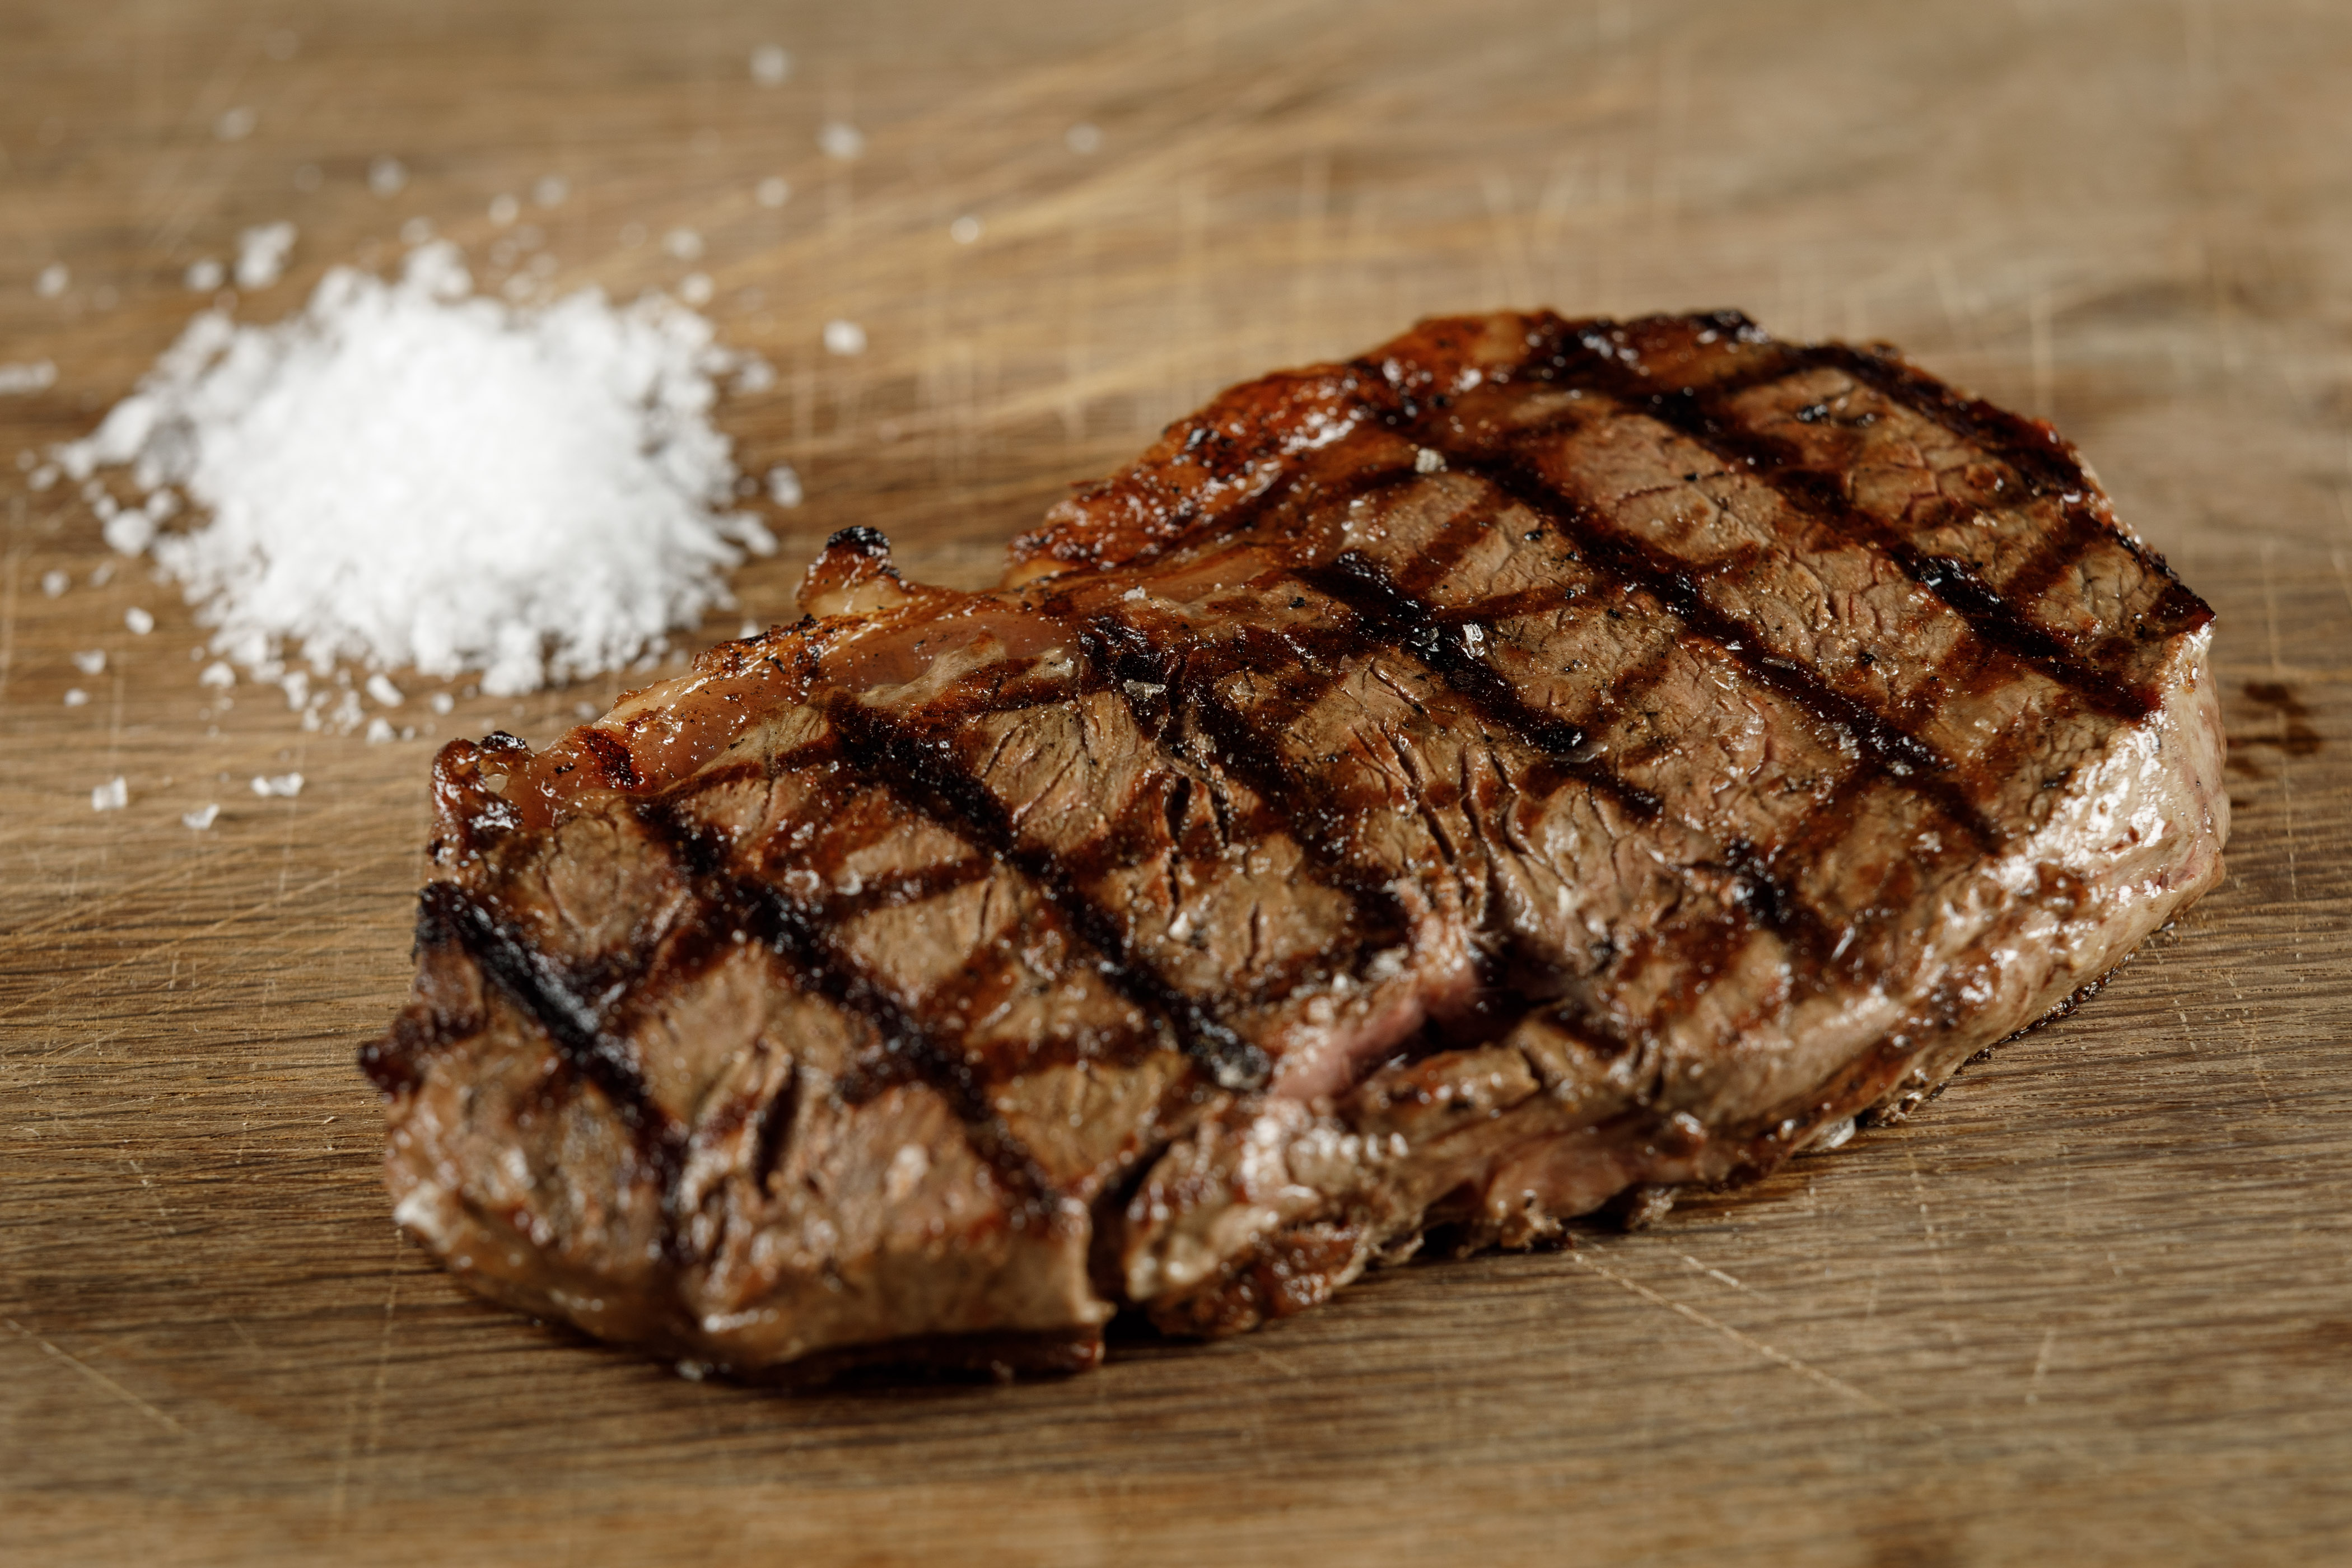 https://www.foodmanufacture.co.uk/var/wrbm_gb_food_pharma/storage/images/publications/food-beverage-nutrition/foodmanufacture.co.uk/article/2021/11/10/who-won-the-world-steak-challenge-2021/13001660-1-eng-GB/Who-won-the-World-Steak-Challenge-2021.jpg